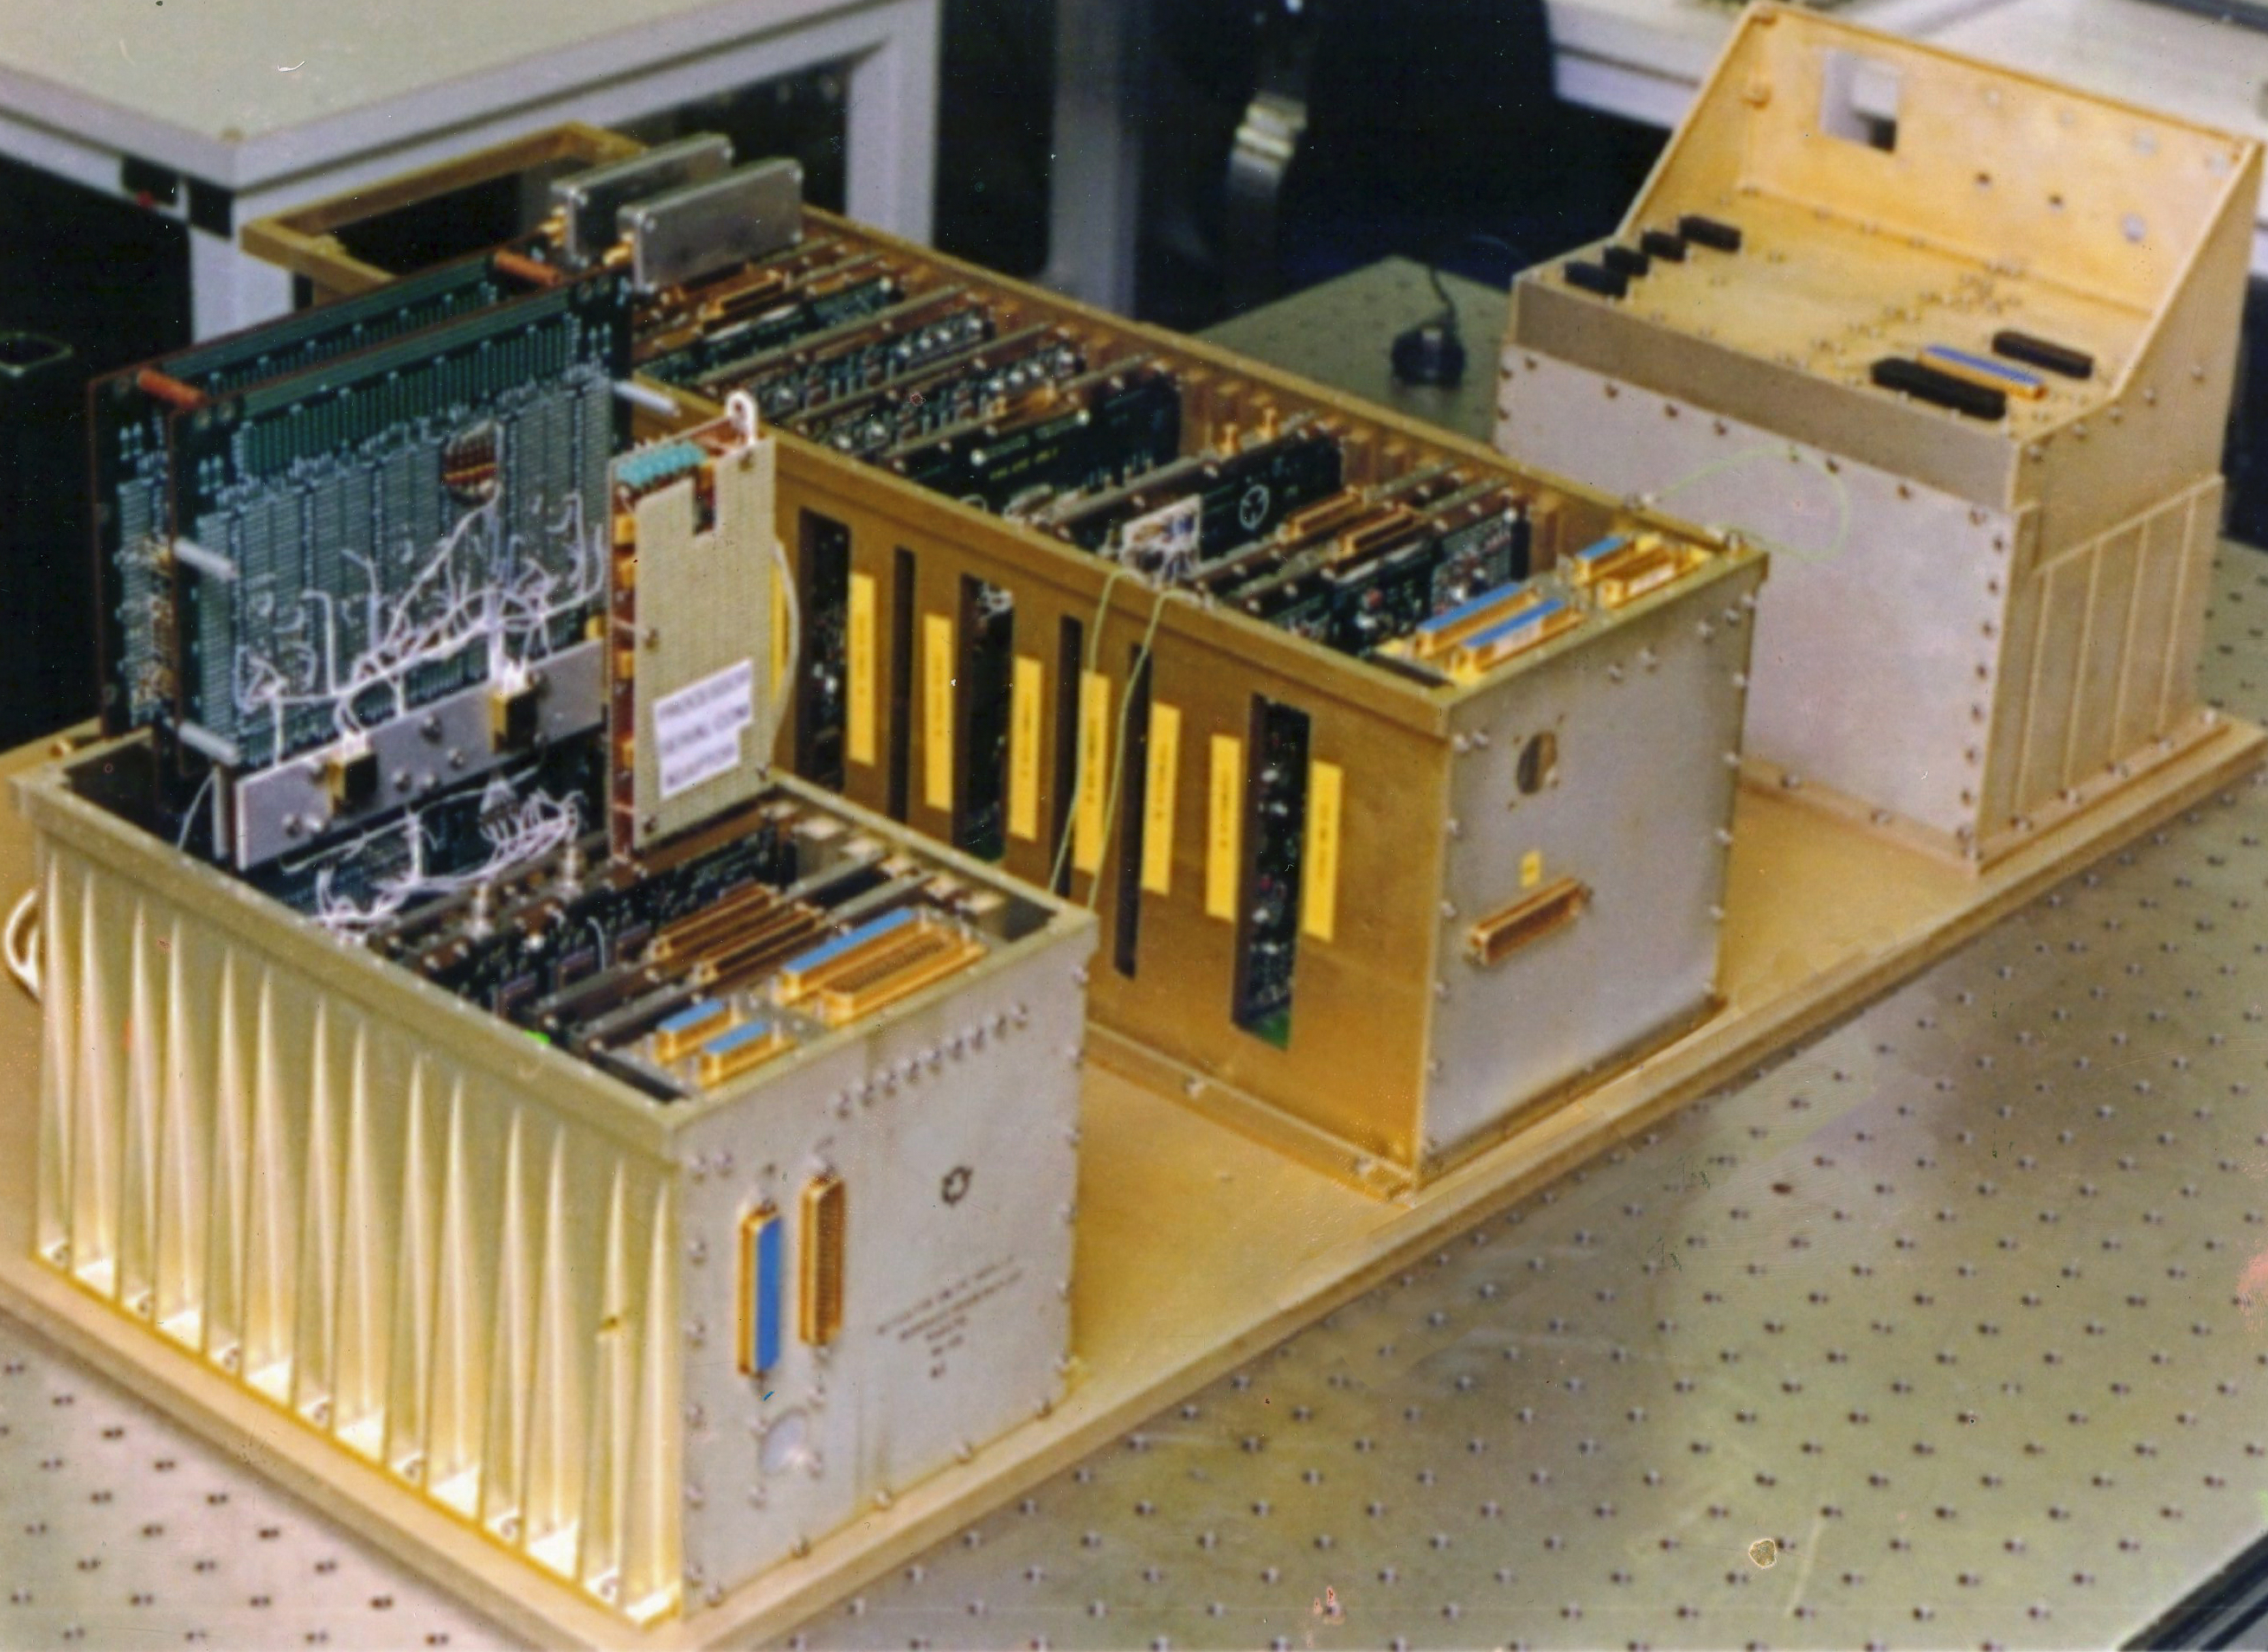 image of the electronics system, showing the ADM, SEM, and SEPS